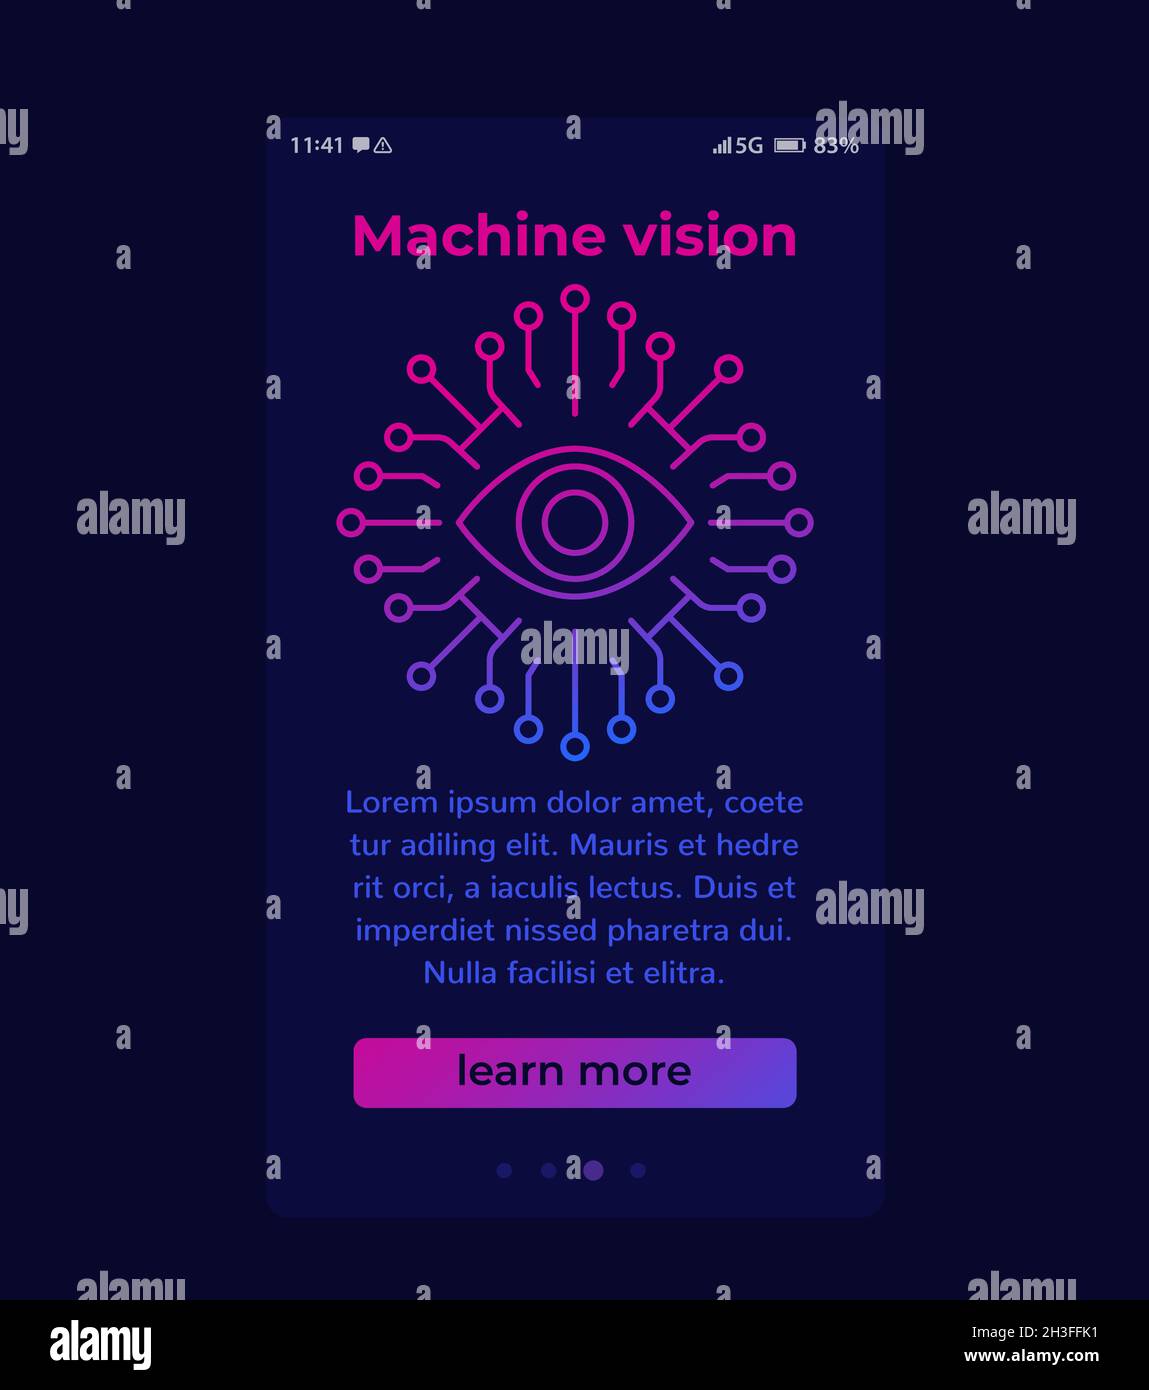 Machine vision vector banner with line icon Stock Vector